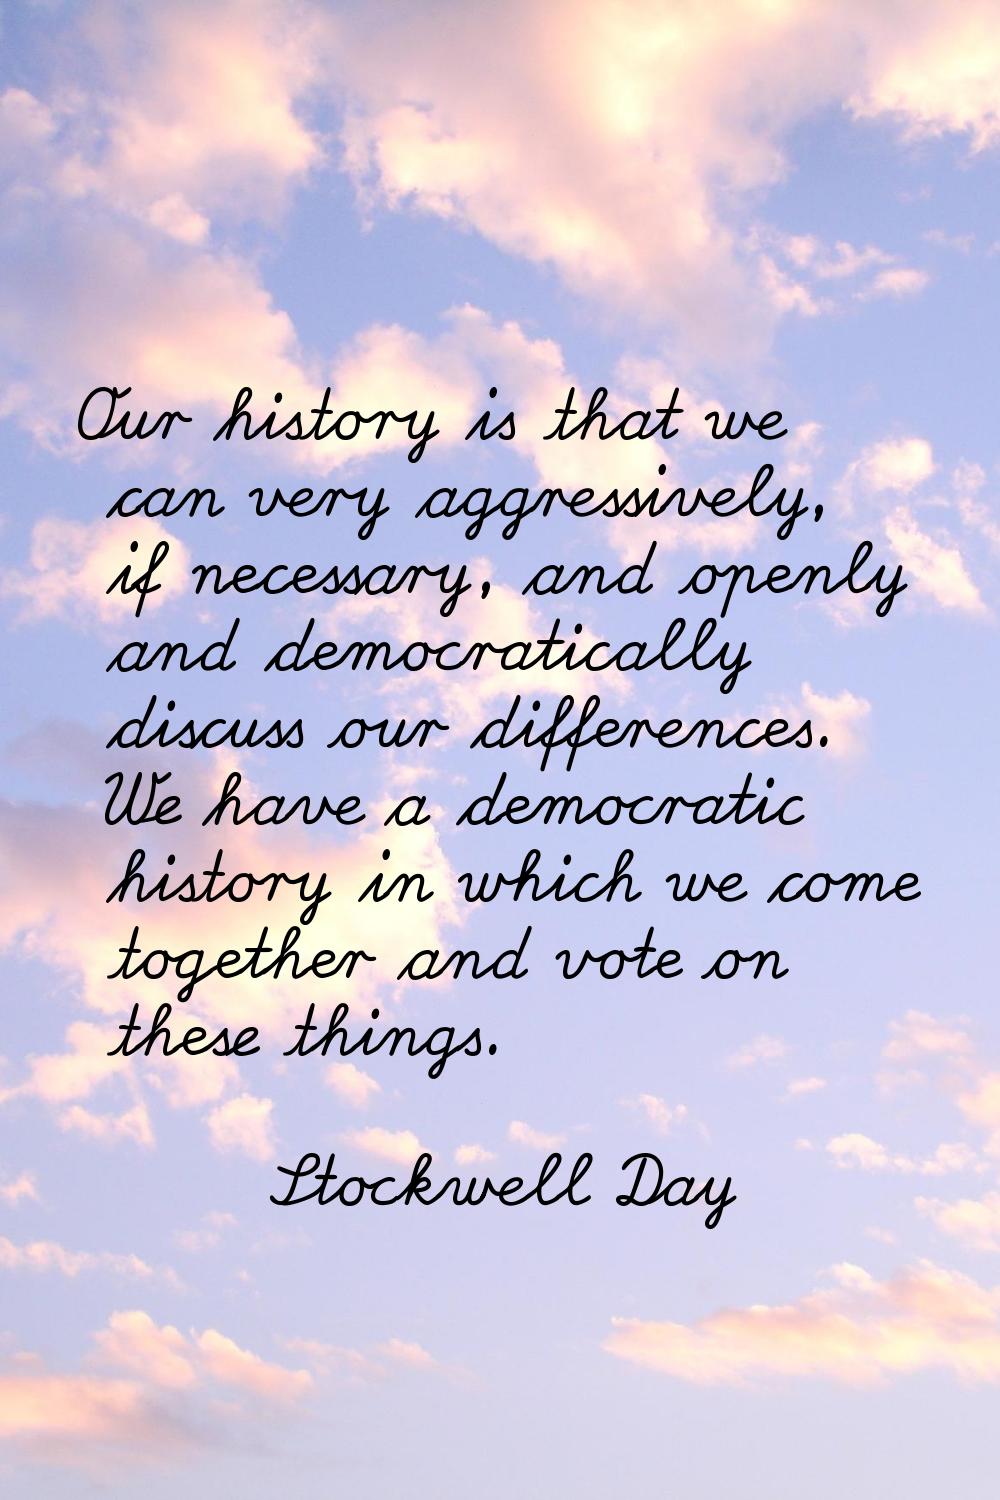 Our history is that we can very aggressively, if necessary, and openly and democratically discuss o